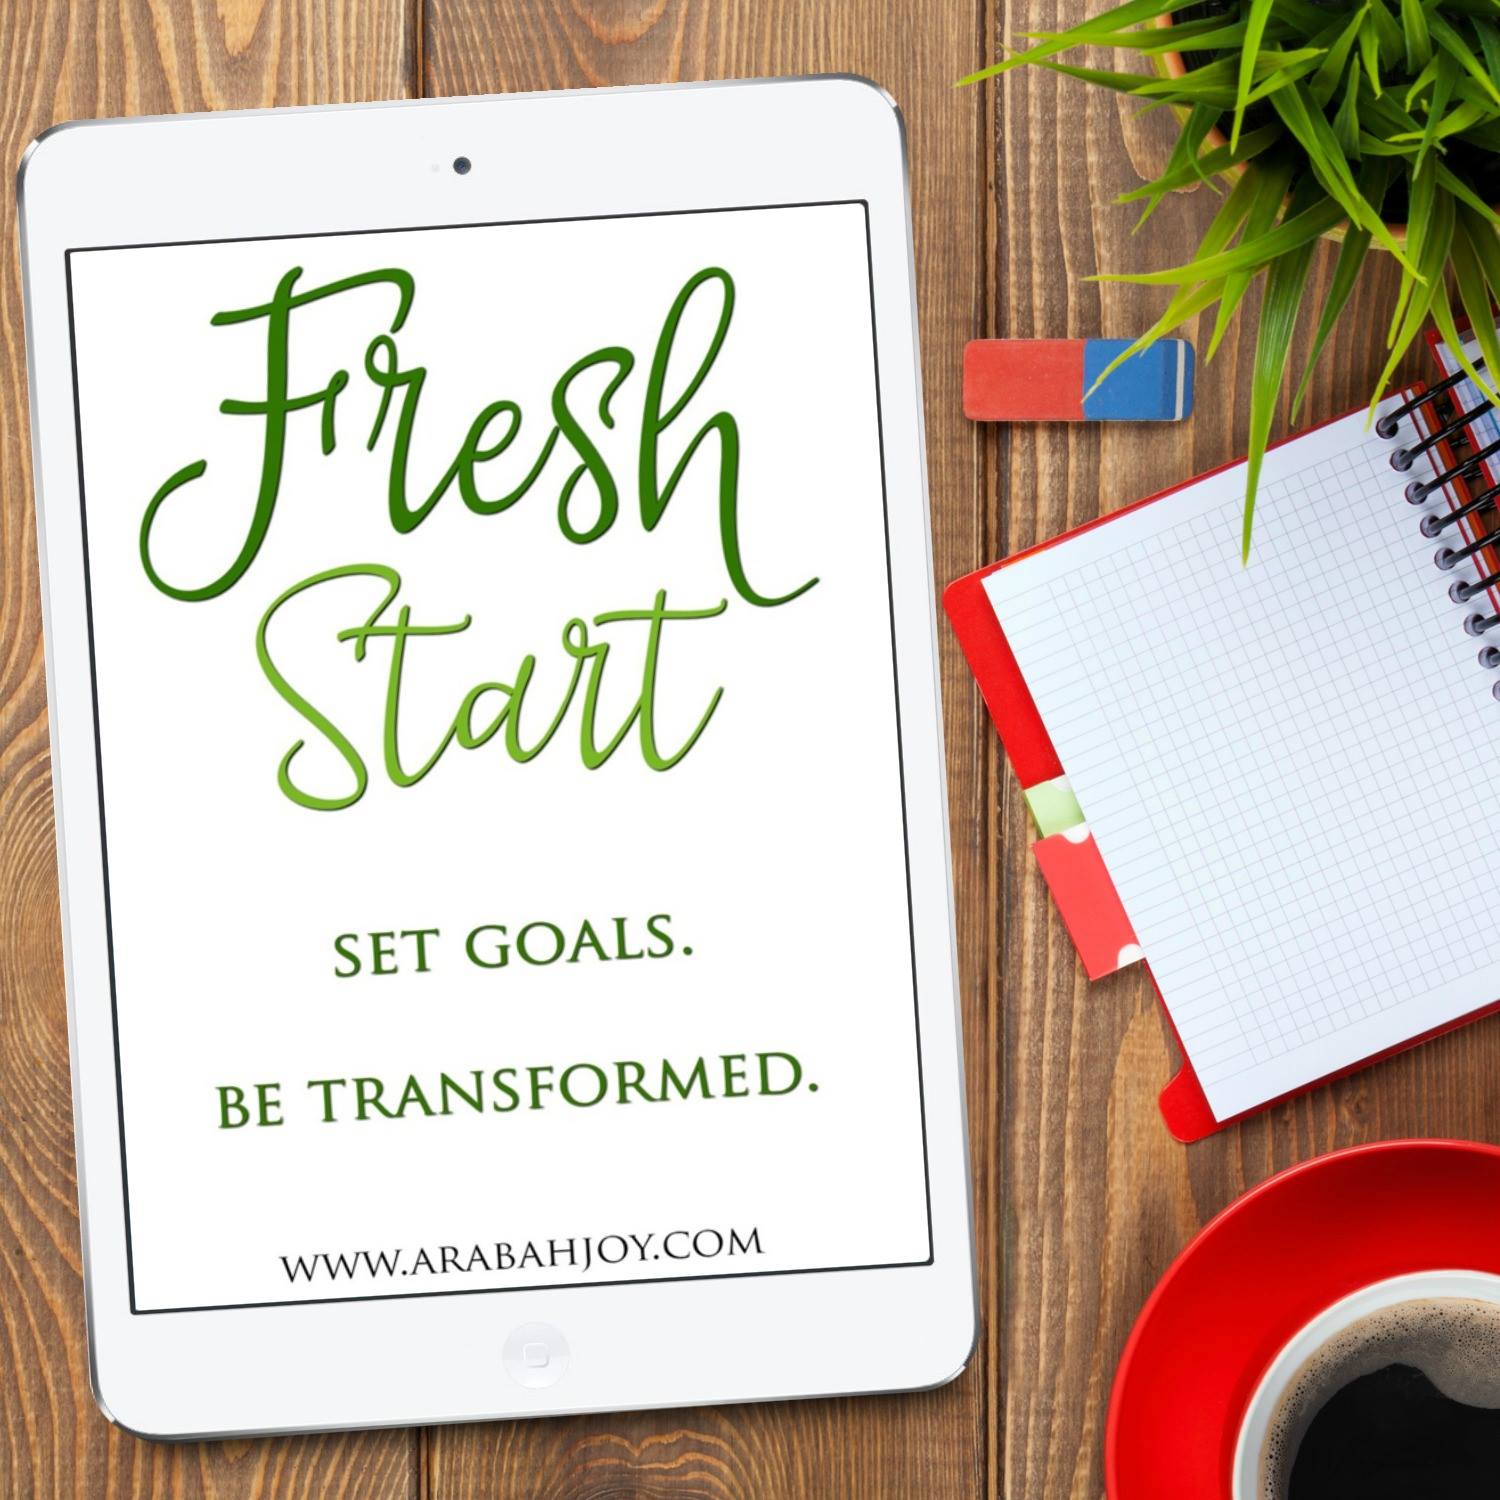 Are you ready for a fresh start? Grace Goals is a new spiritual growth resource where you get a step by step biblical process for setting goals and pursuing godly change.